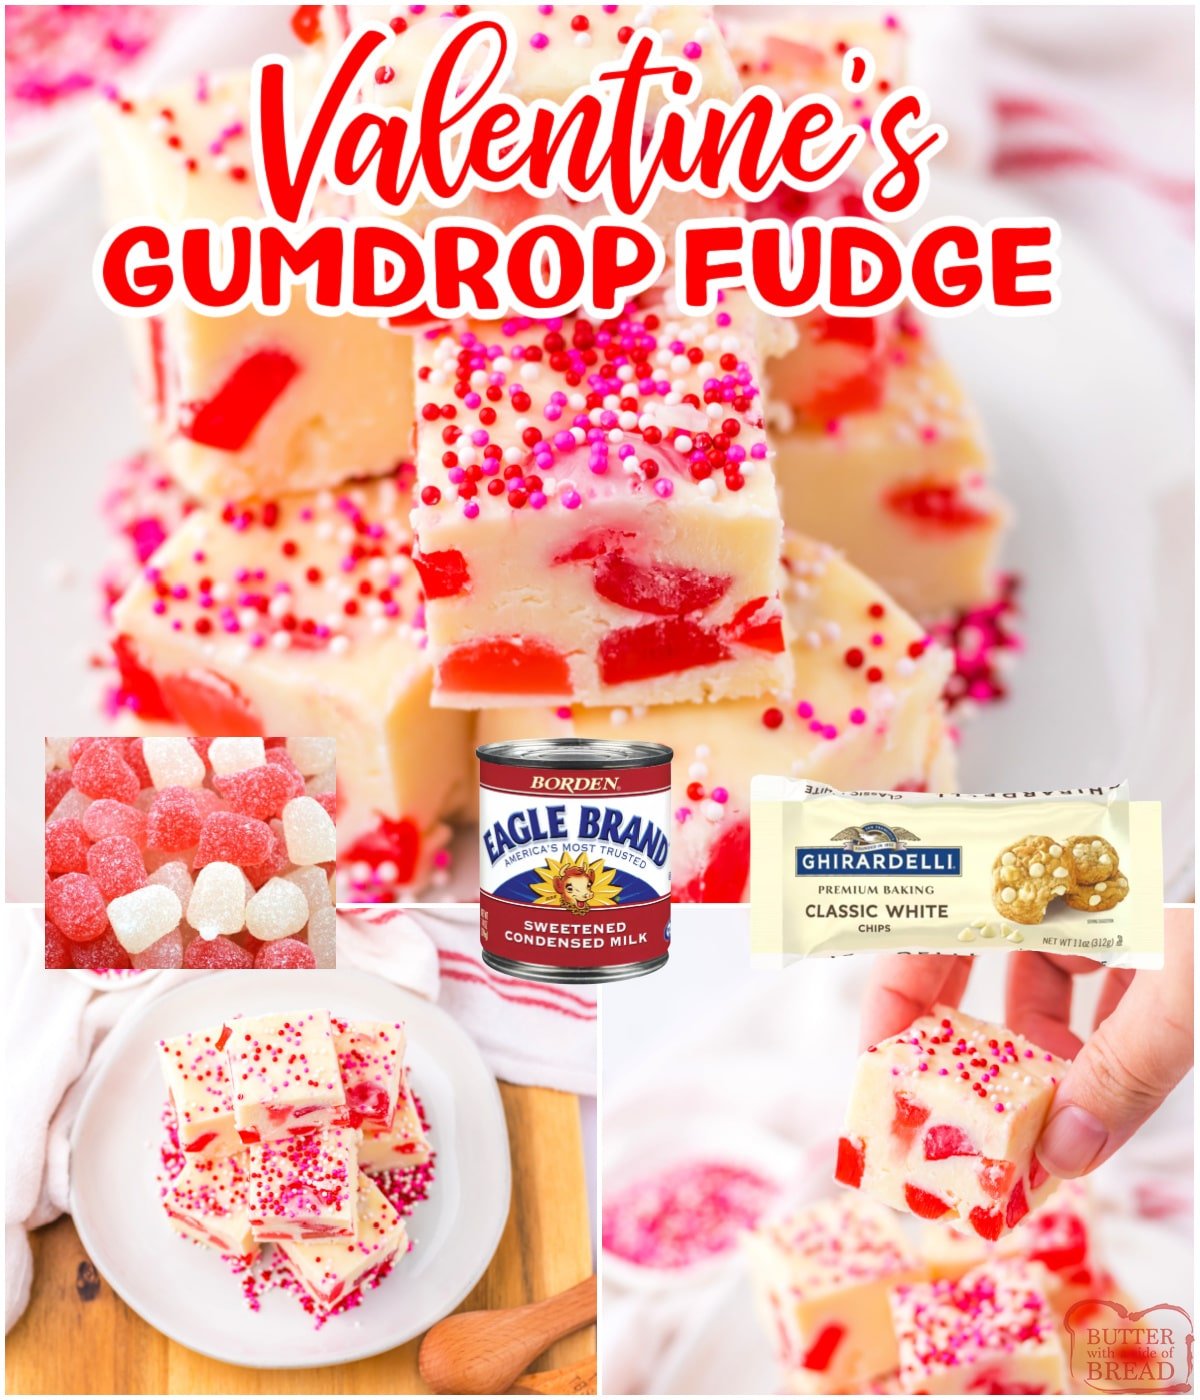 Valentine's Gumdrop Fudge is a fun, fast and easy Valentine’s treat!  You only need three ingredients to make this white chocolate fudge with pink and red gumdrops. 